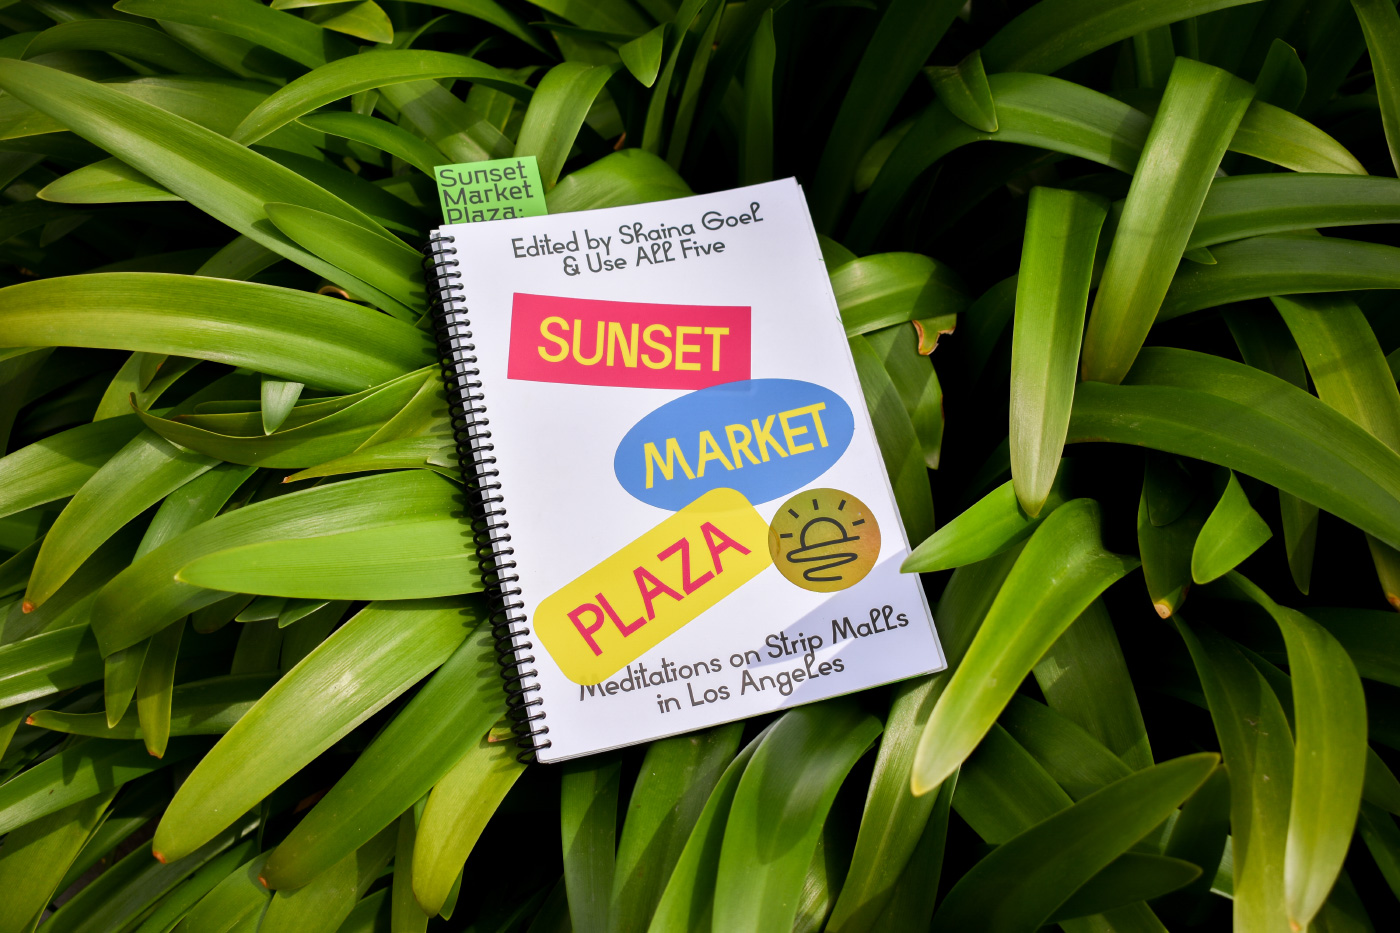 Cover of a book with Sunset Plaza Market on the cover